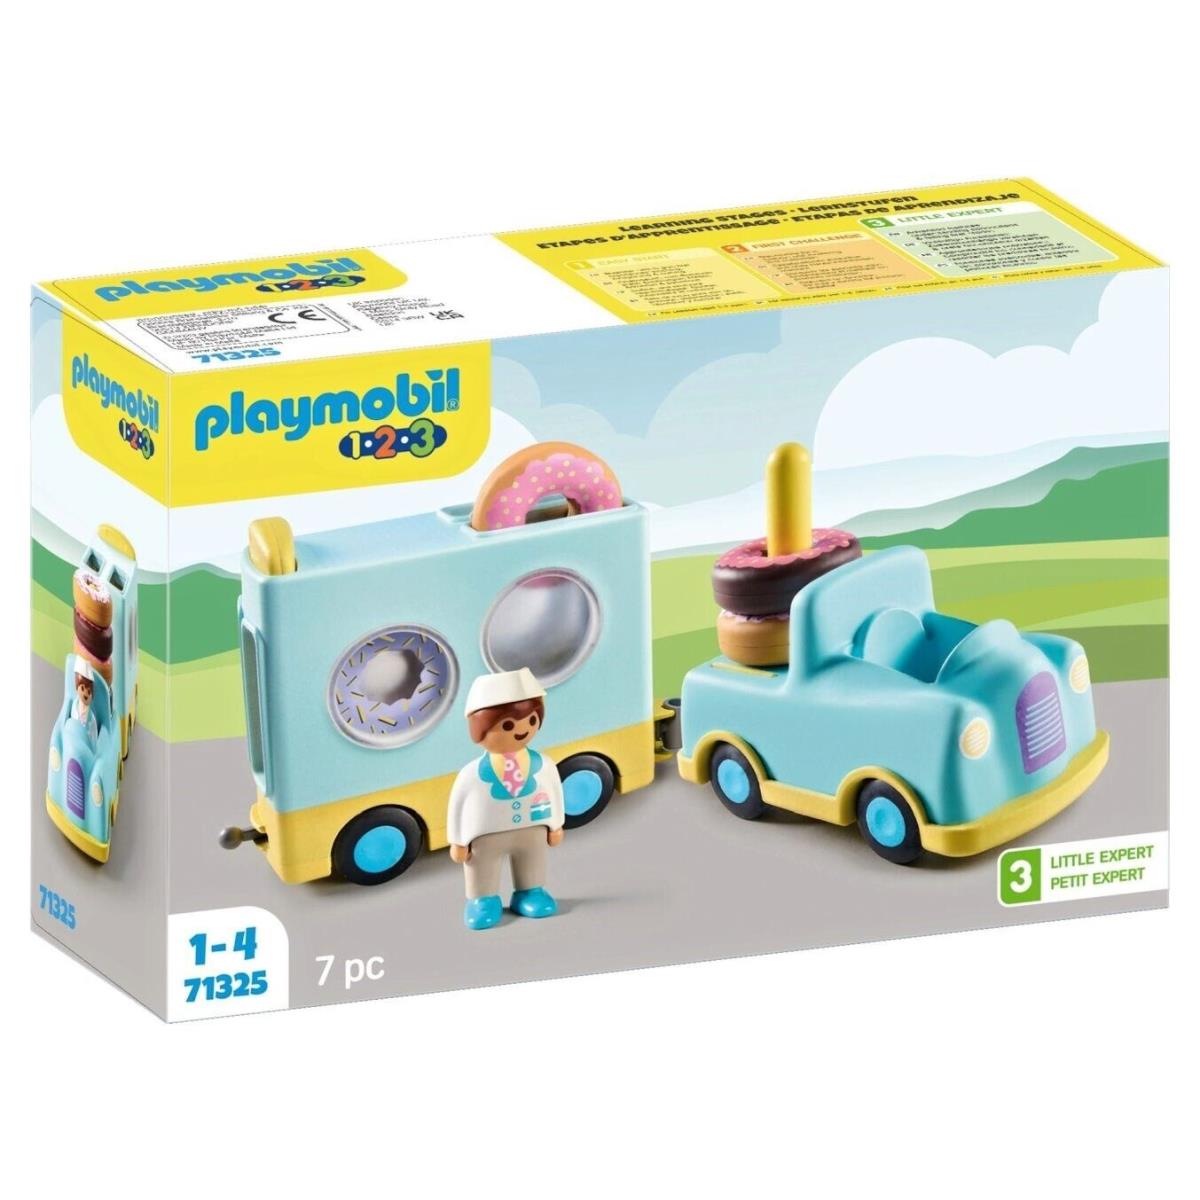 Playmobil 71325 1.2.3: Doughnut Truck with Stacking and Sorting